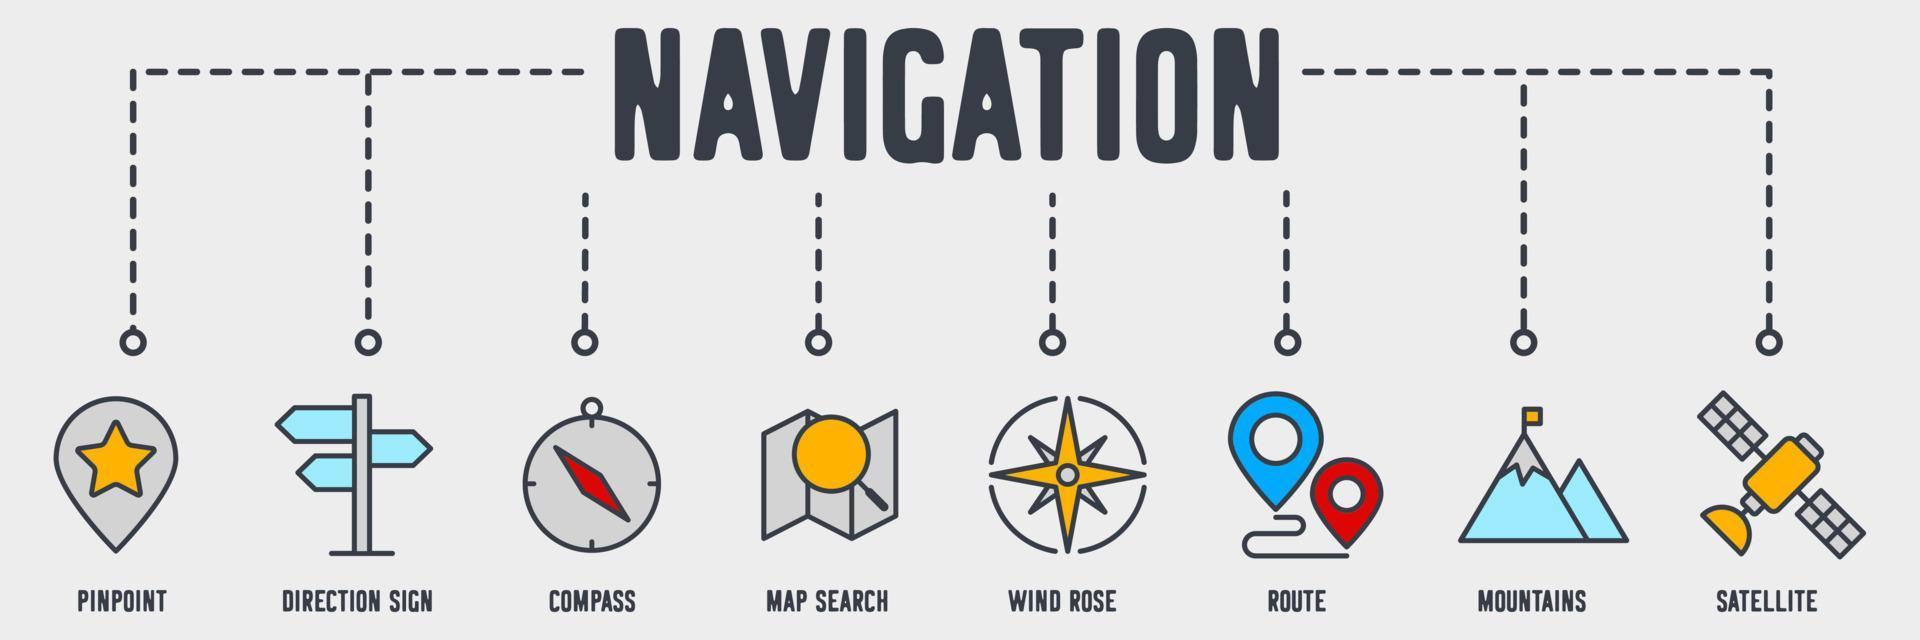 Map location and navigation banner web icon. pinpoint, direction sign, compass, map search, wind rose, route, mountains, satellite vector illustration concept.